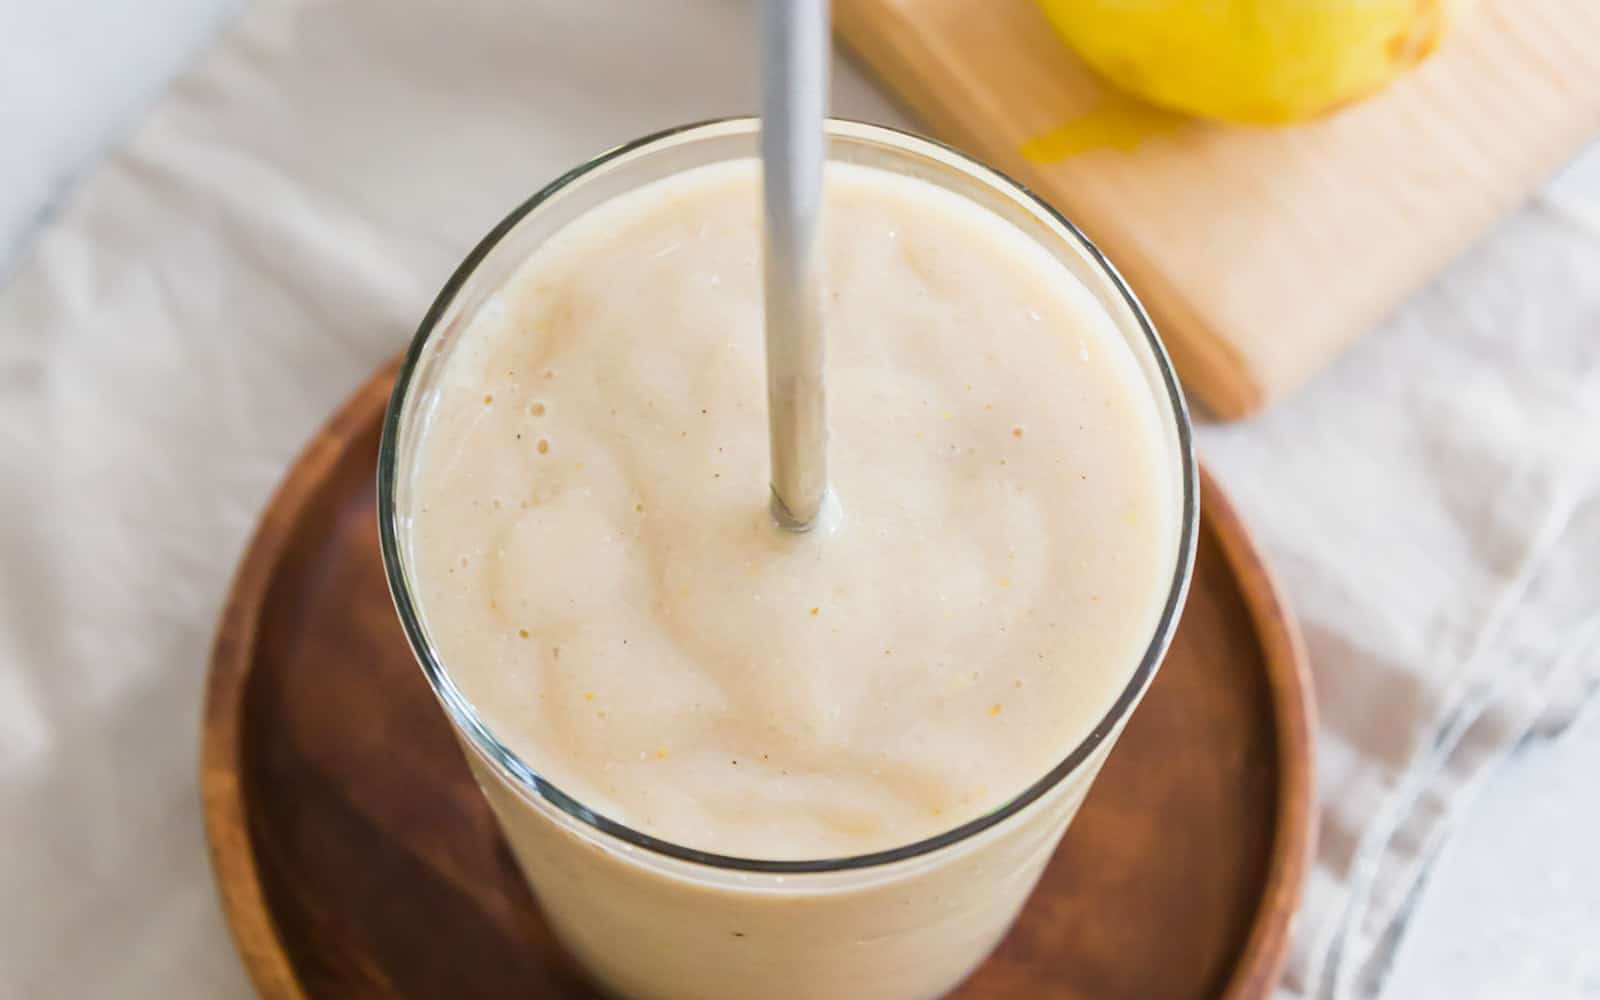 Pear smoothie in a glass with a metal straw.